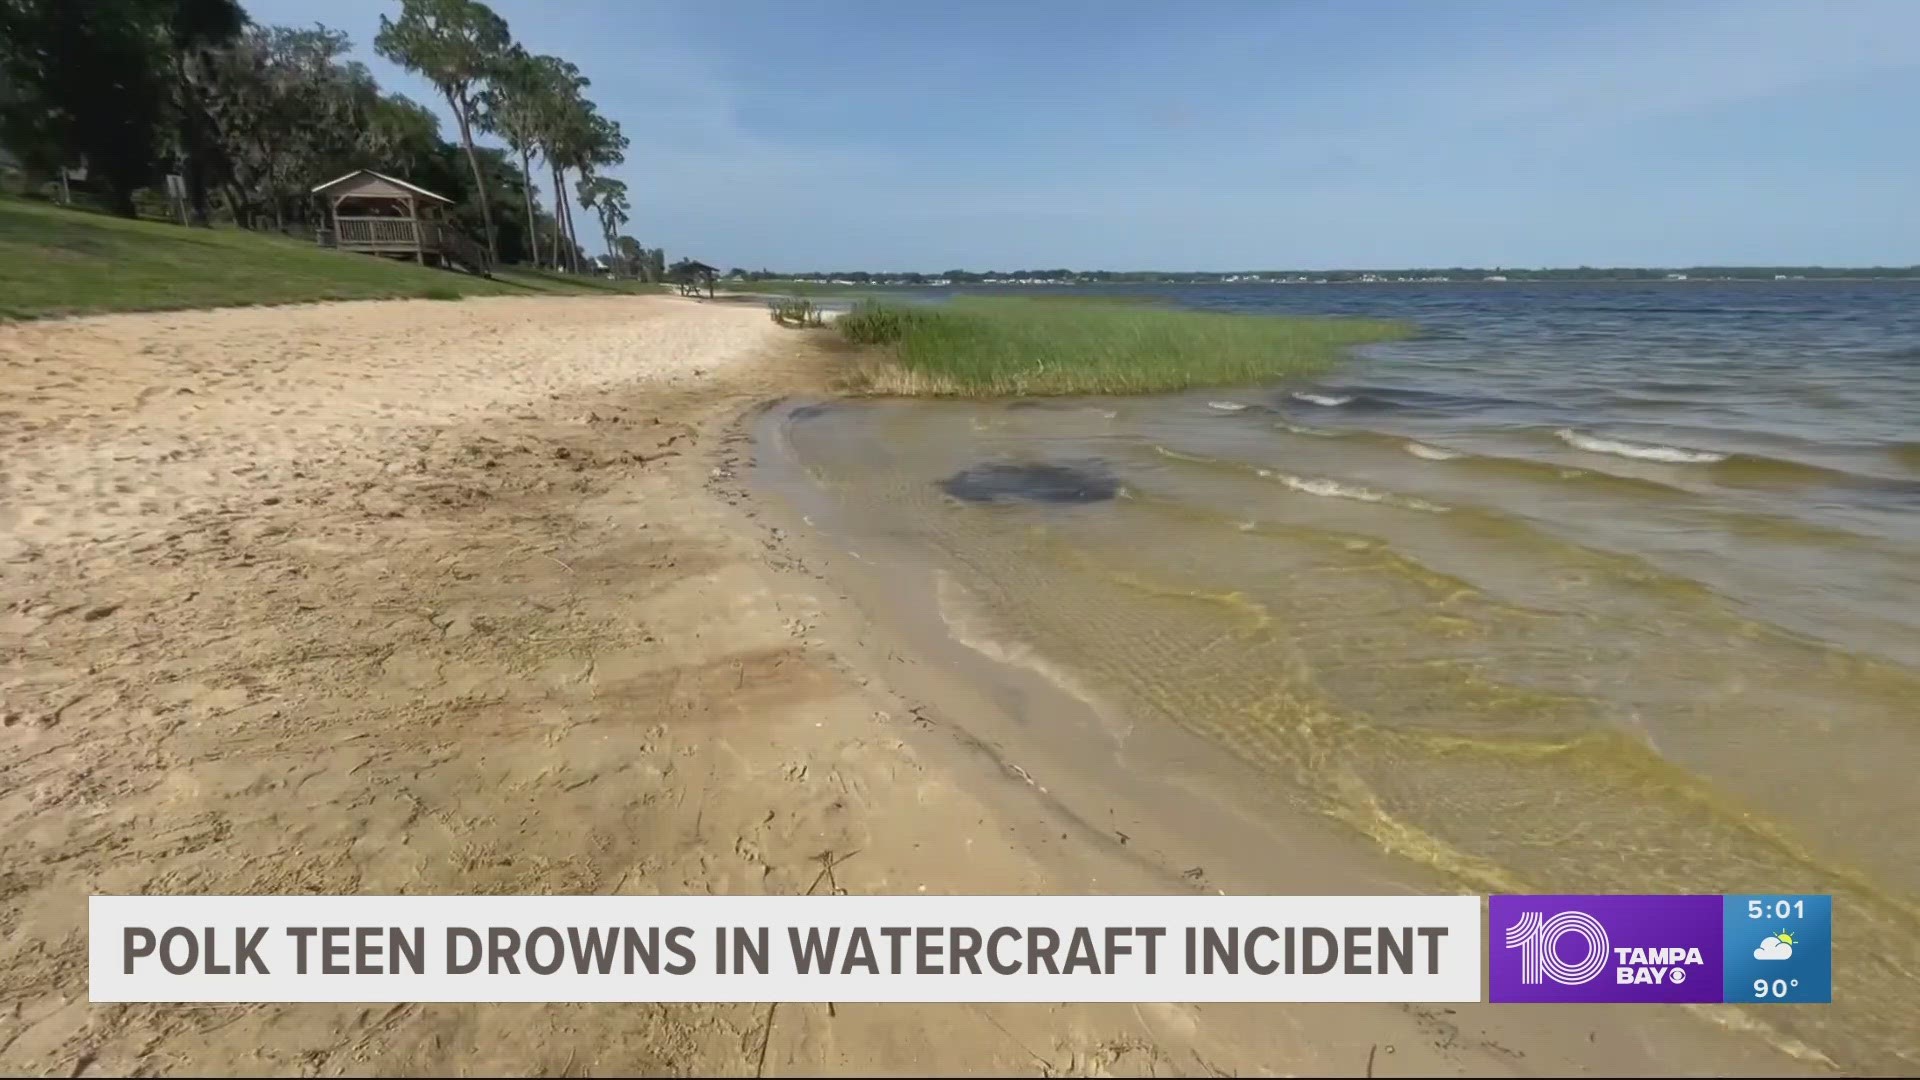 The teen was thrown from his Jet Ski after taking an abrupt turn, according to the sheriff's office.